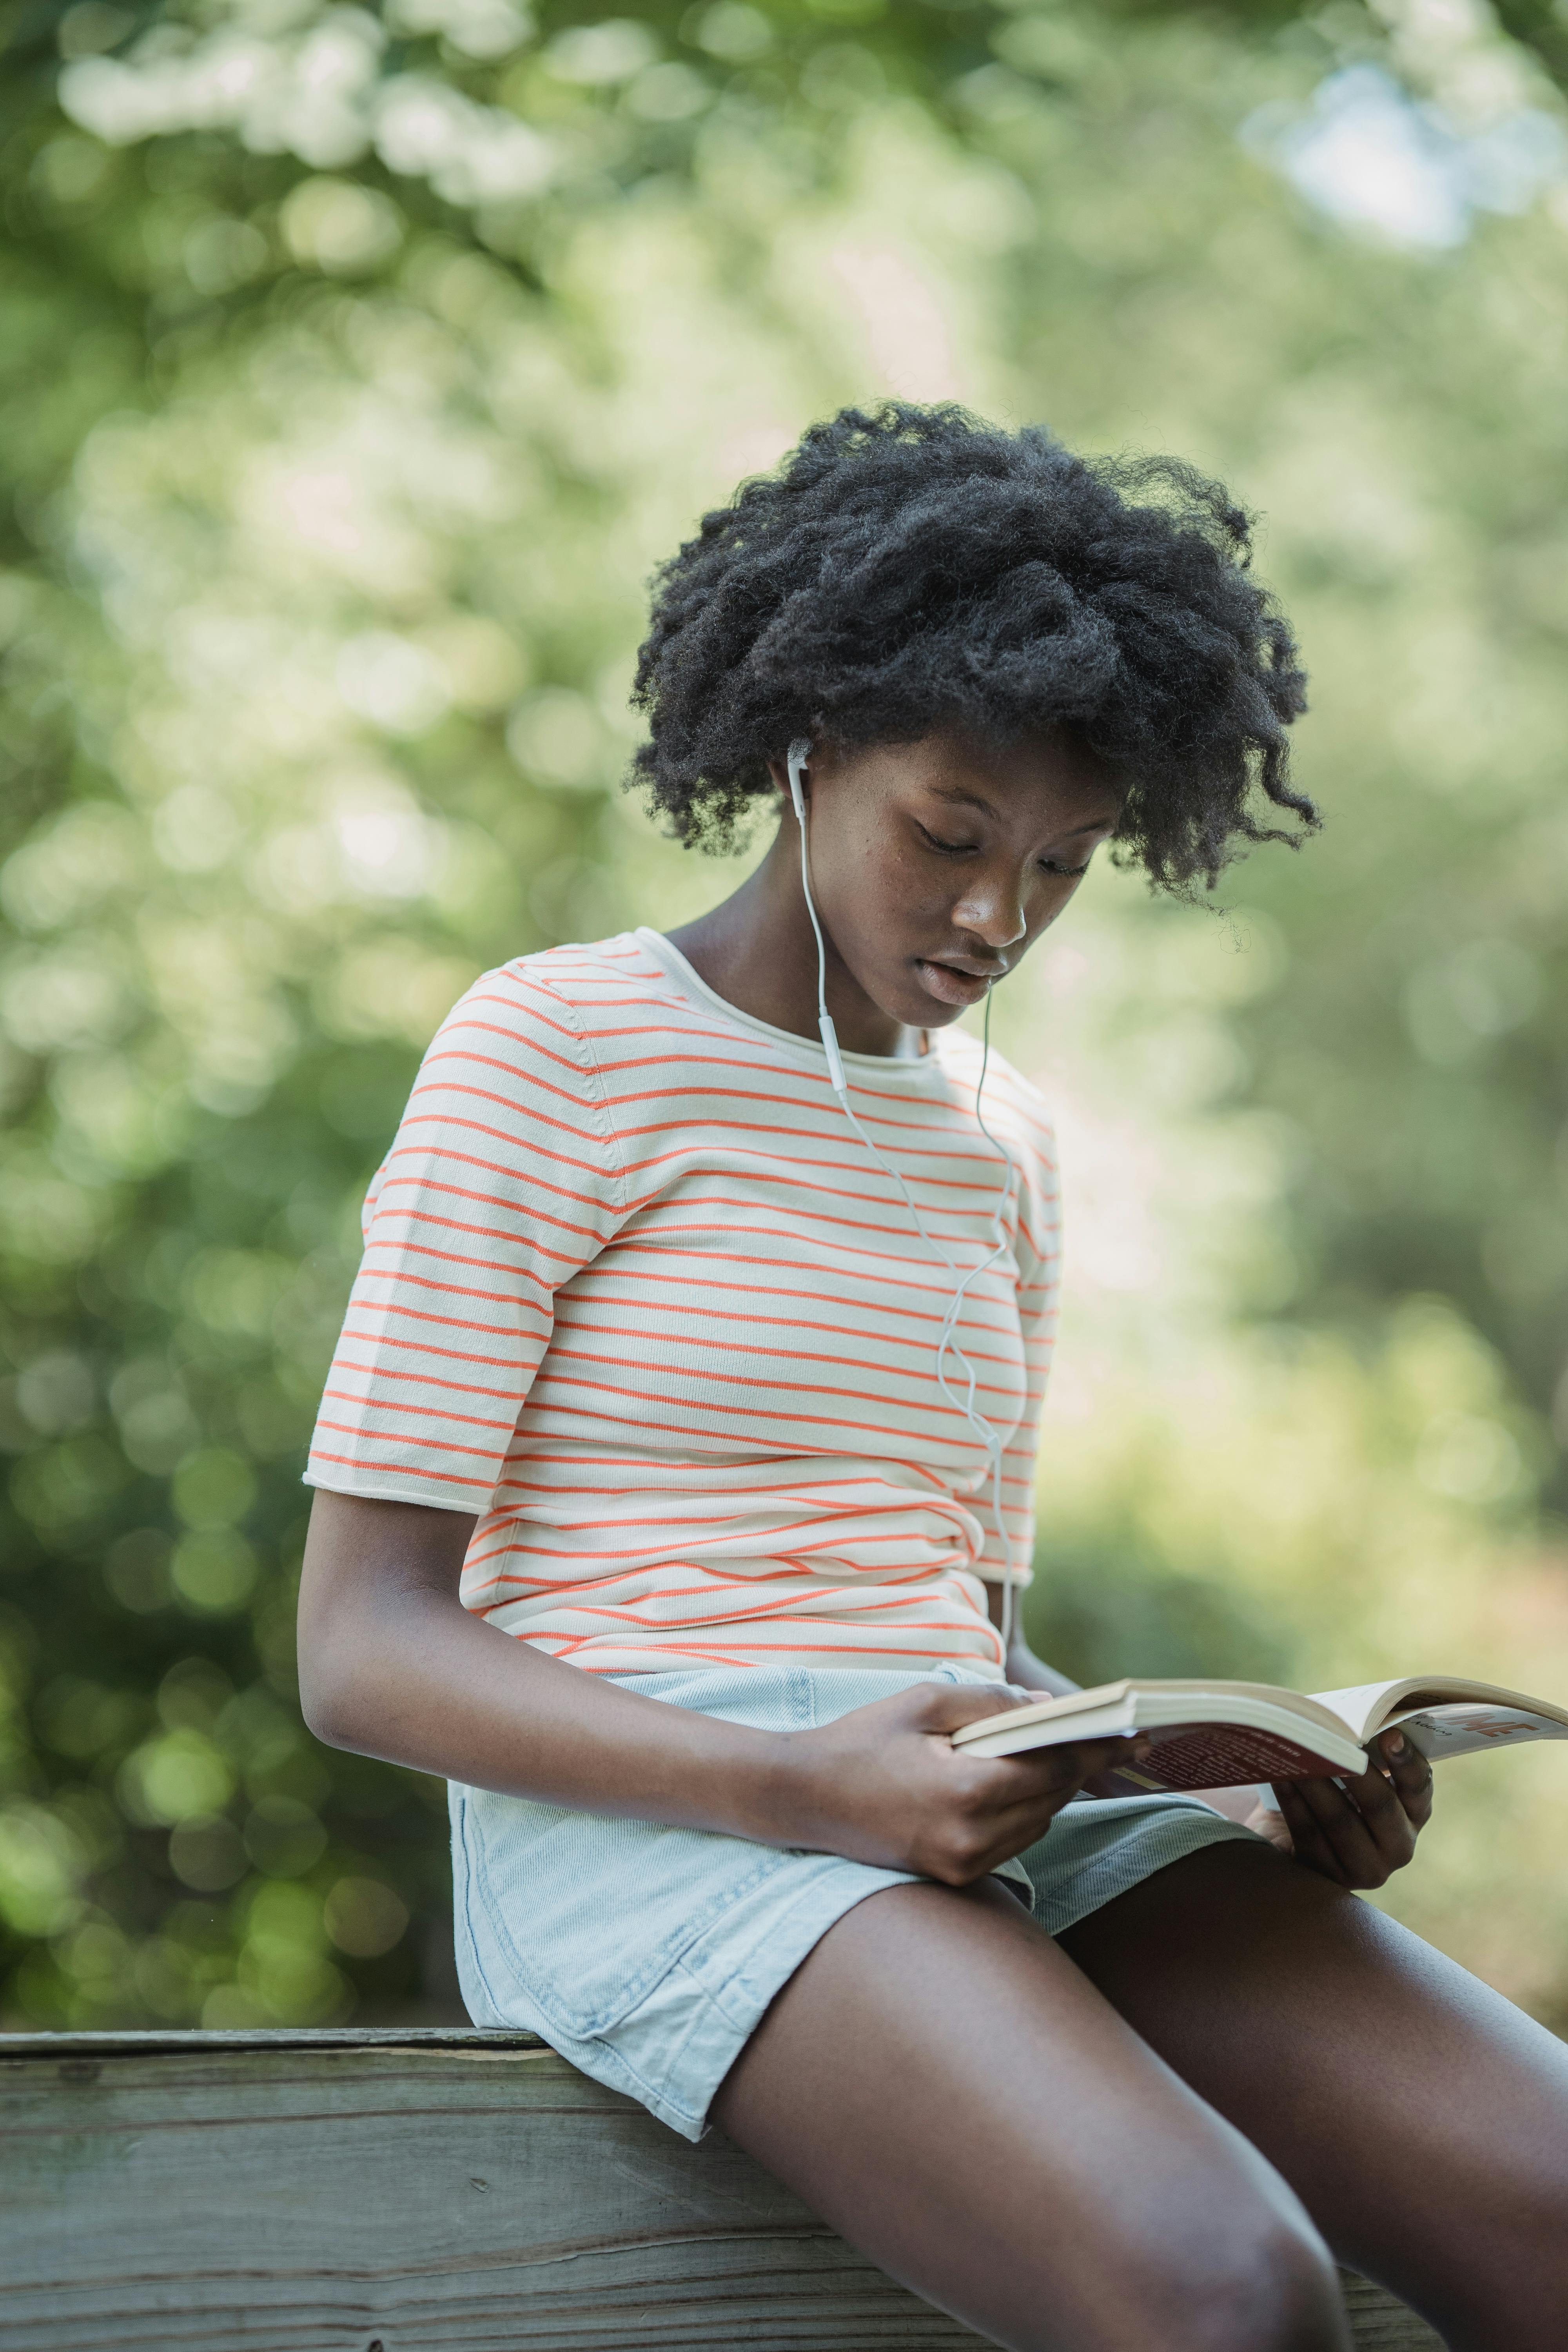 Teen girl in a striped t-shirt and shorts reading a book